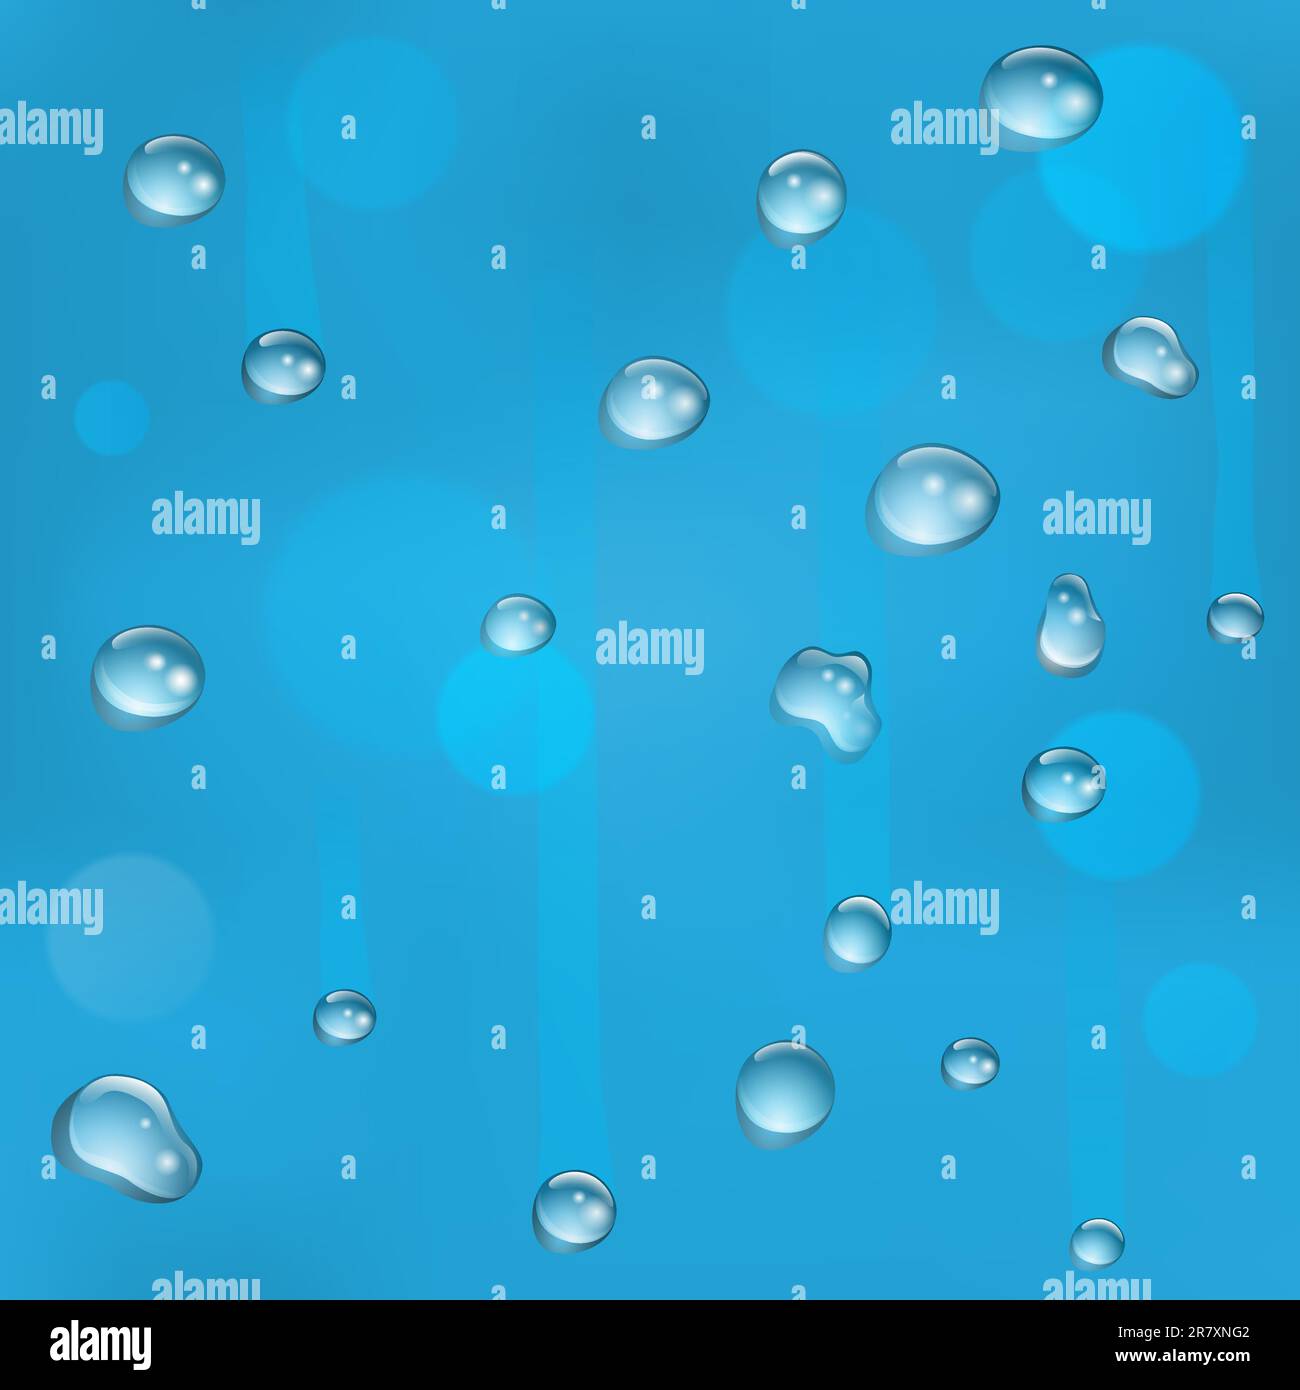 Water drops on glass illustration. Can be tiled seamlessly to form larger background. Stock Vector